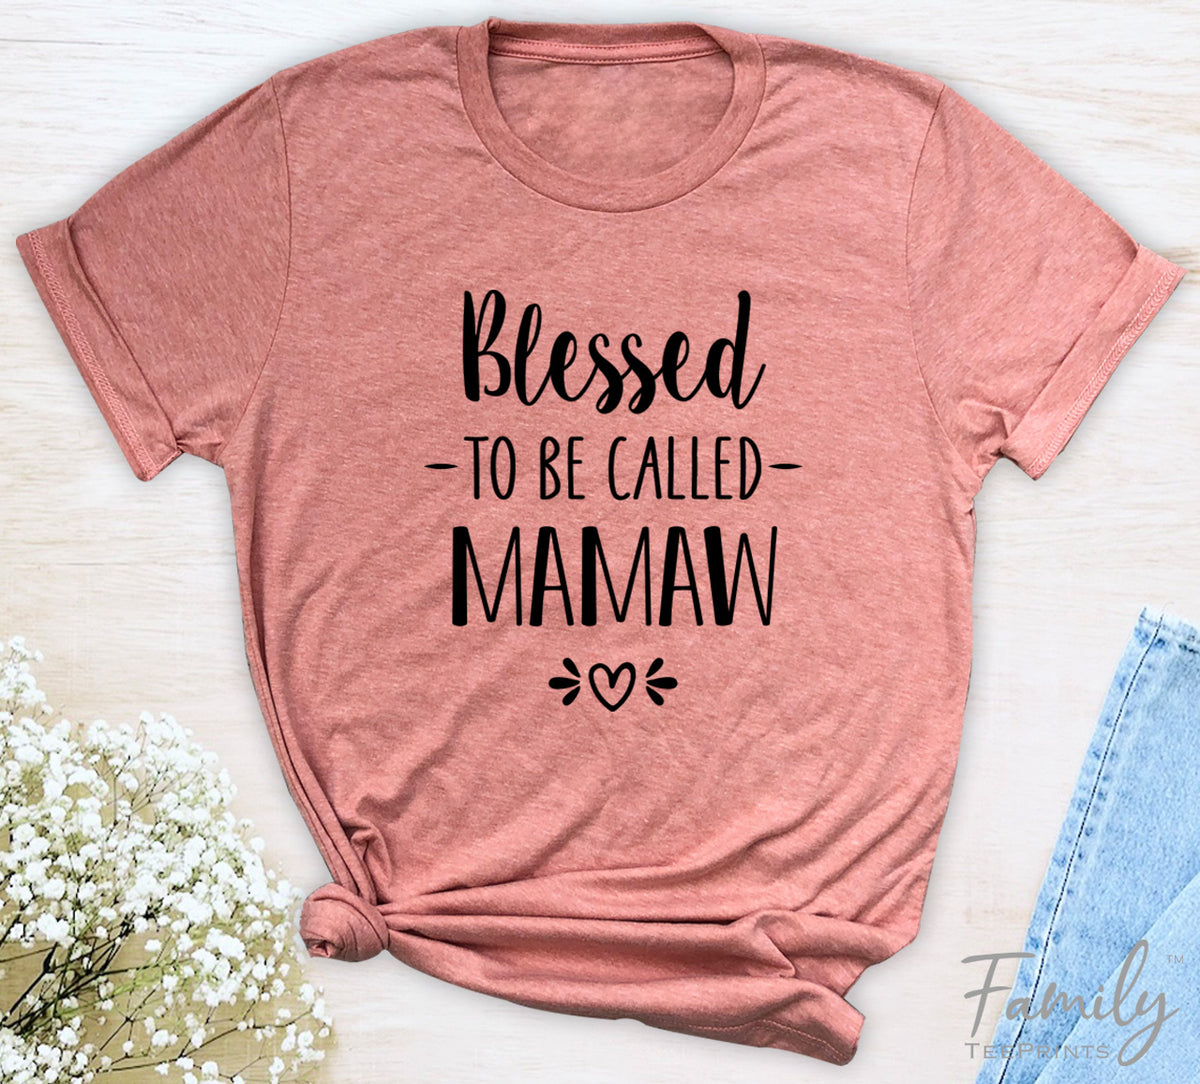 Blessed To Be Called Mamaw - Unisex T-shirt - Mamaw Shirt - Gift For New Mamaw